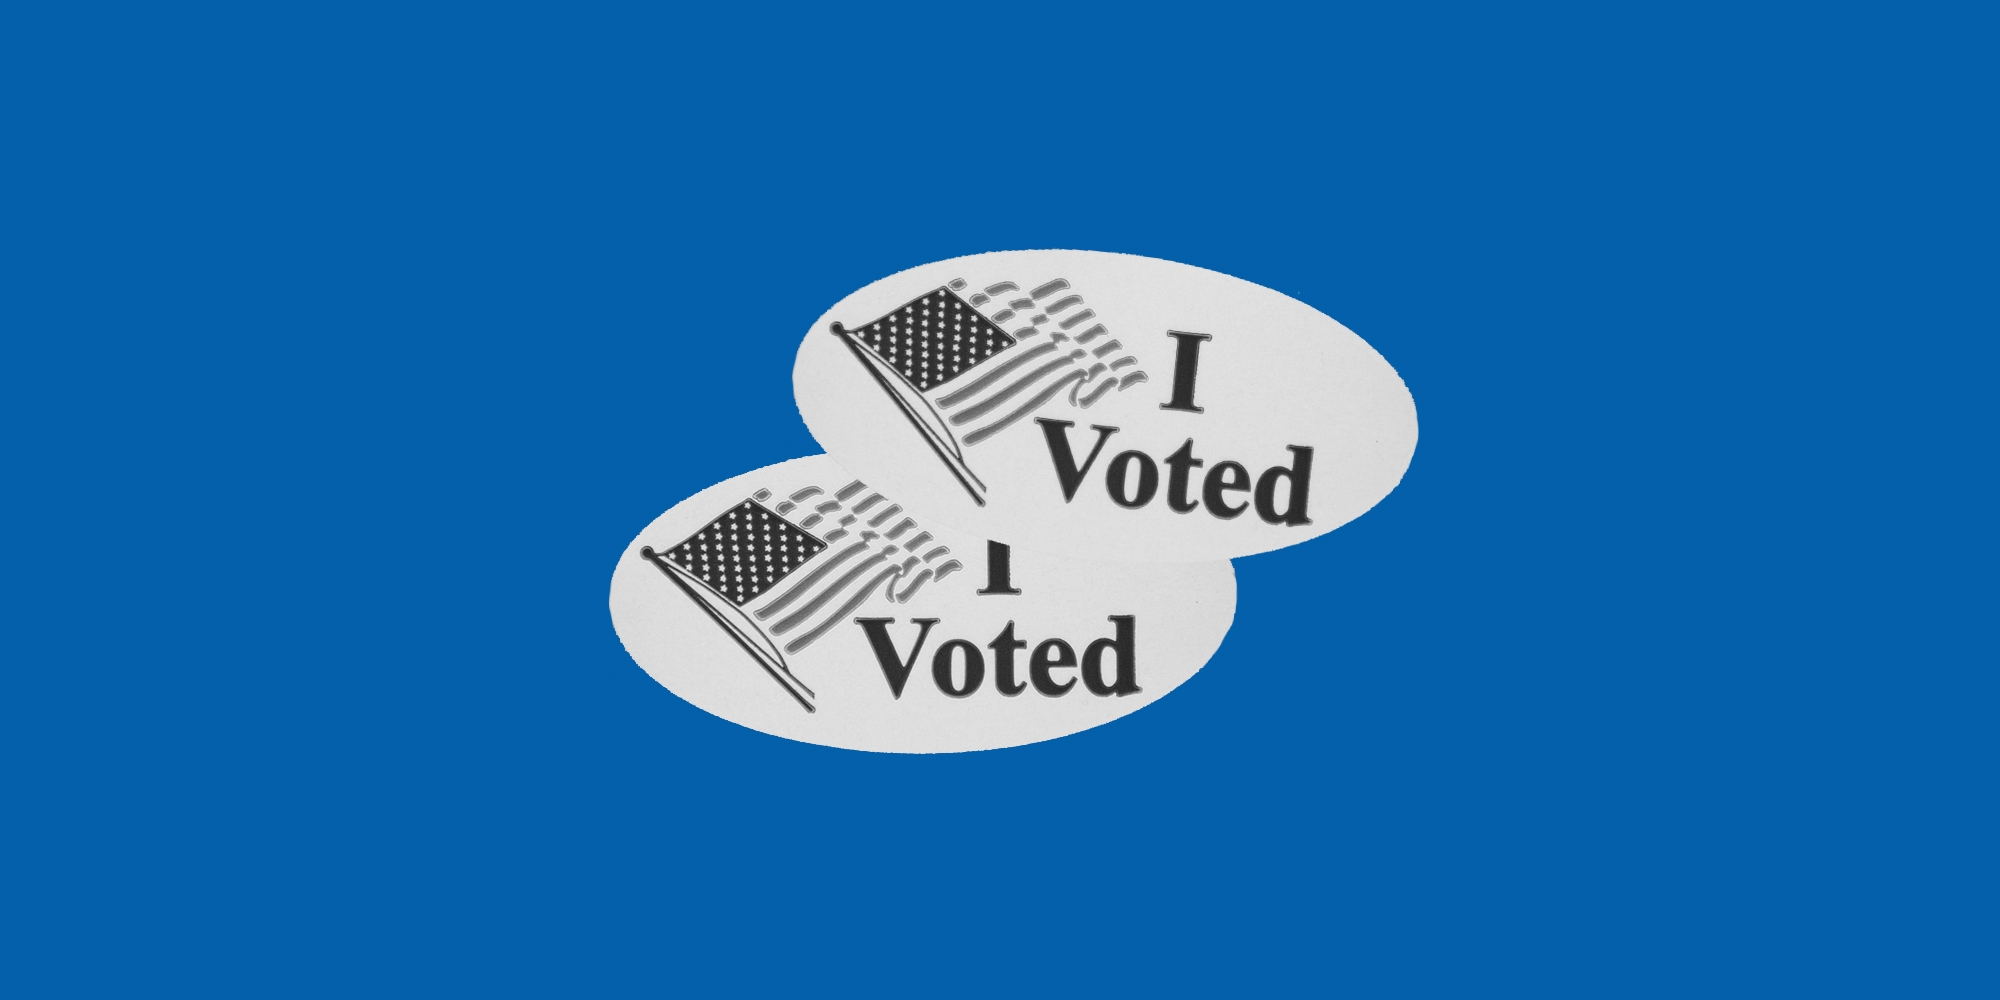 Two "I Voted" stickers like those given out on election day in the USA.